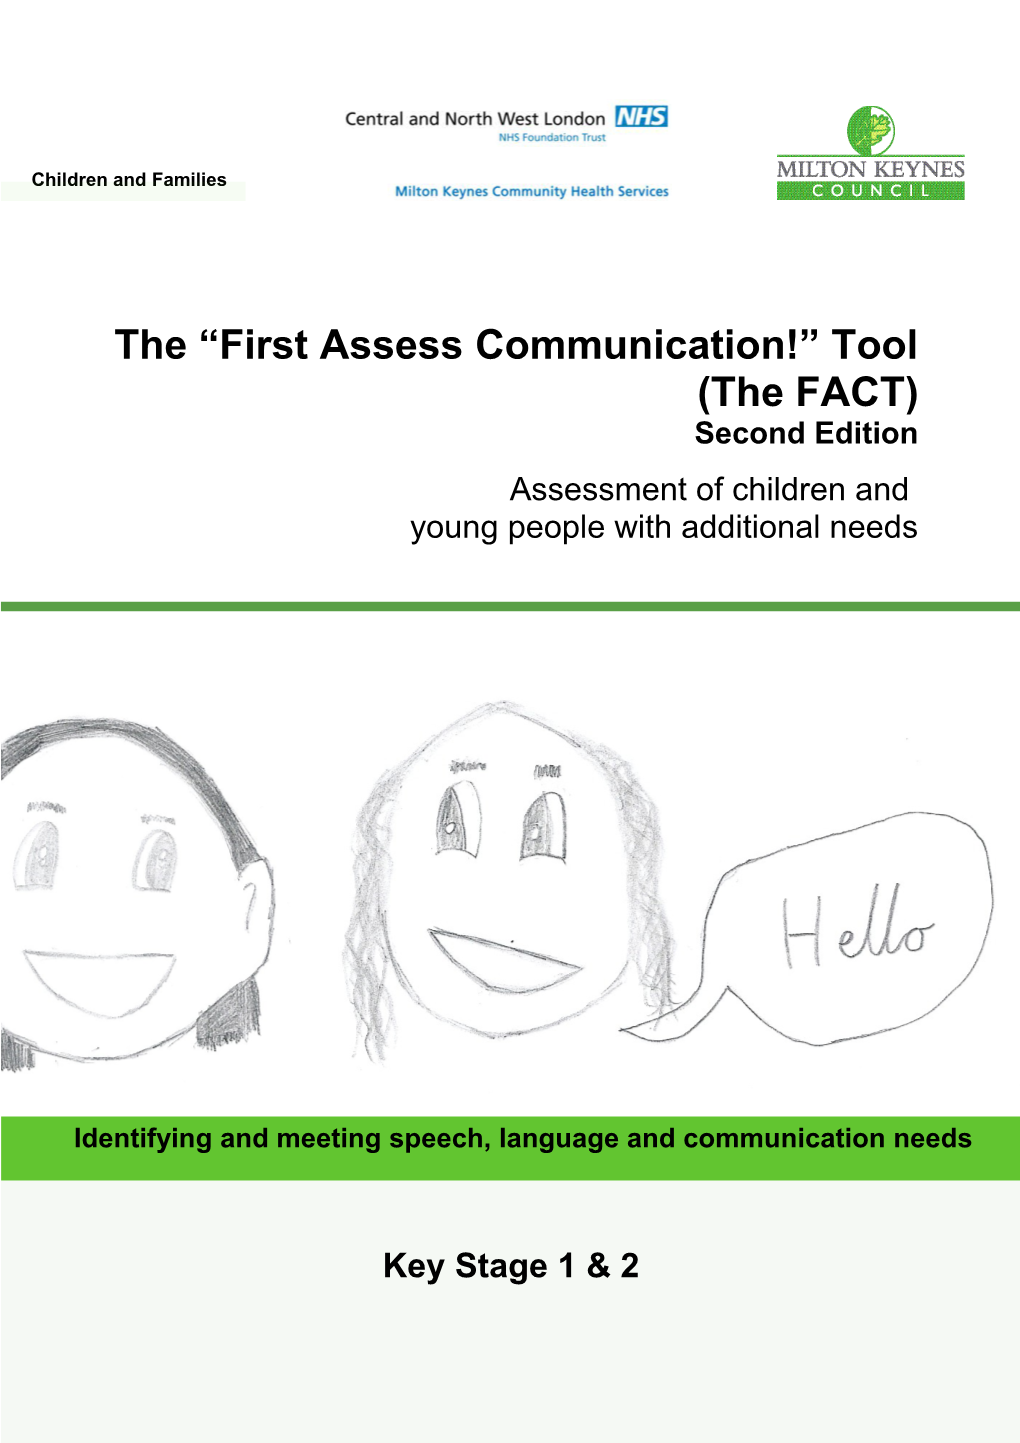 How To Use The FACT In Key Stages 1-4 (KS2 Revised)